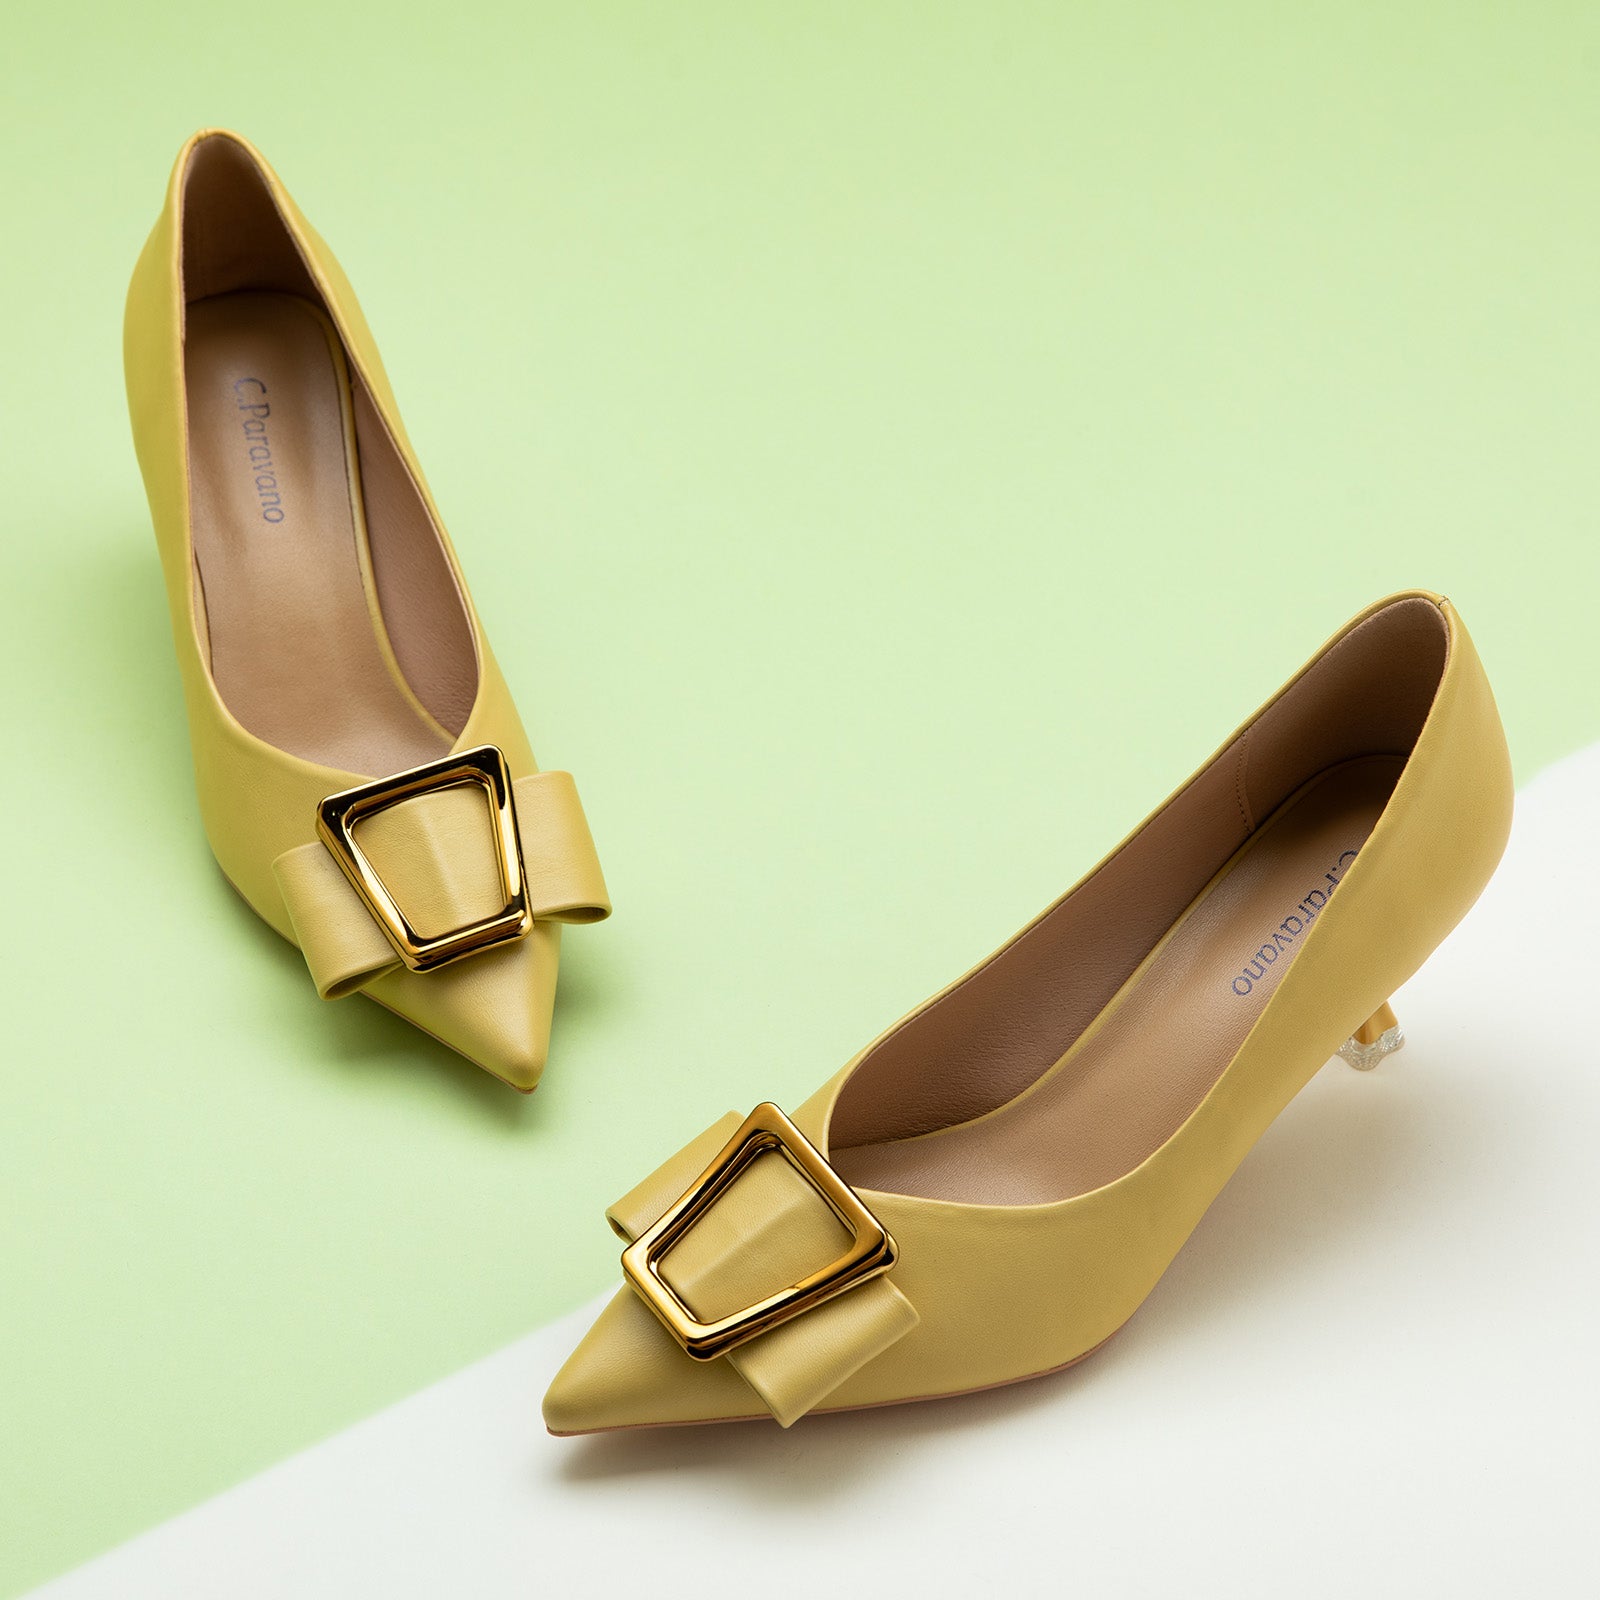 Yellow Geometric Kitten Heel Women Pumps, a cheerful and vibrant choice for a playful and stylish look